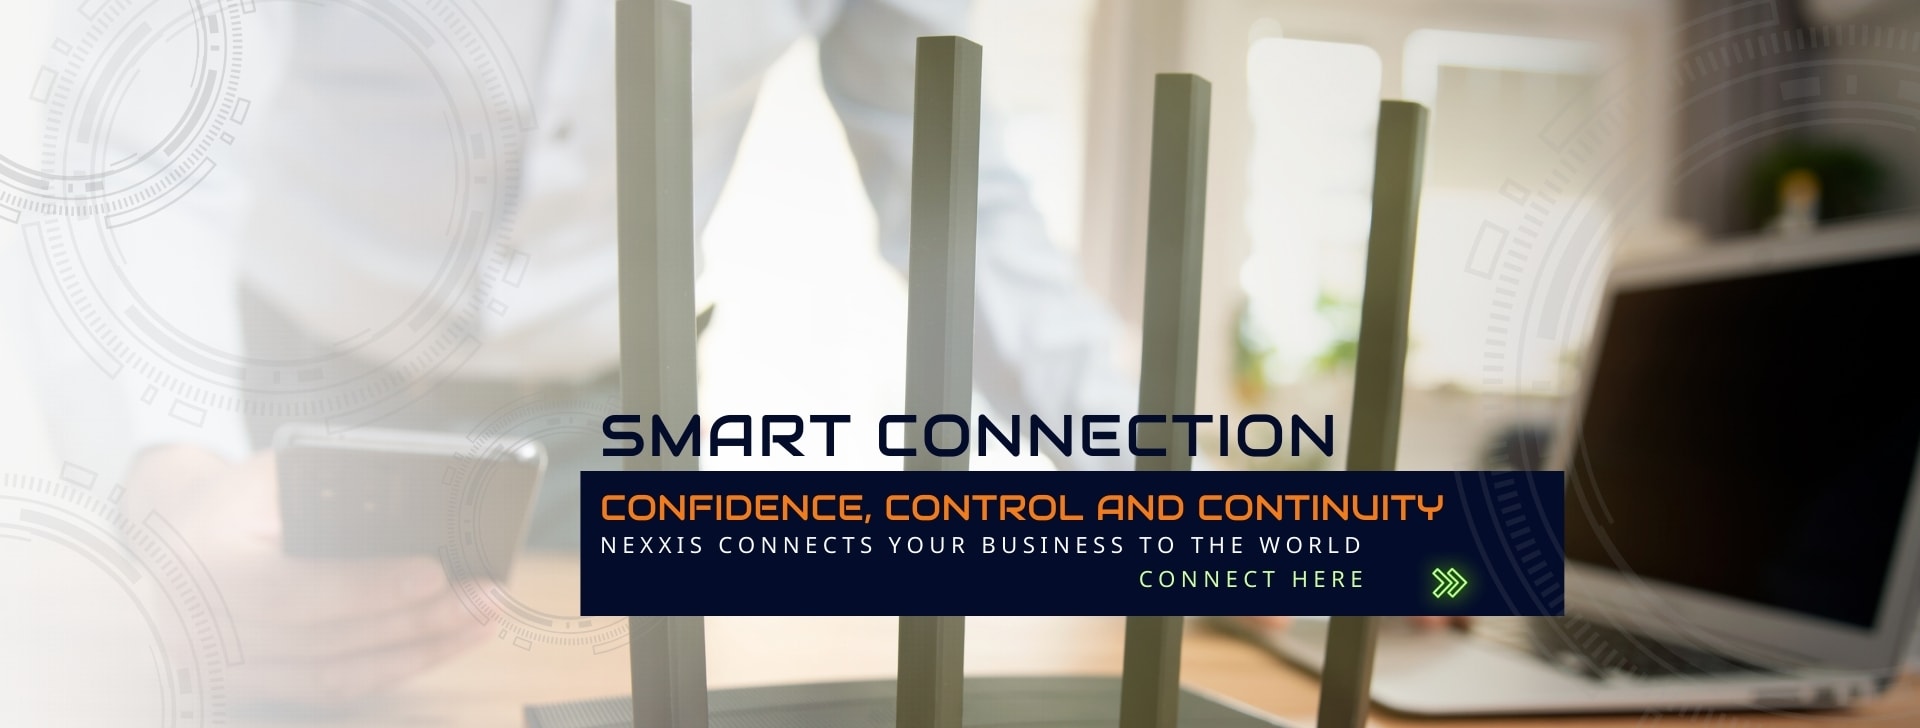 Smart Connections